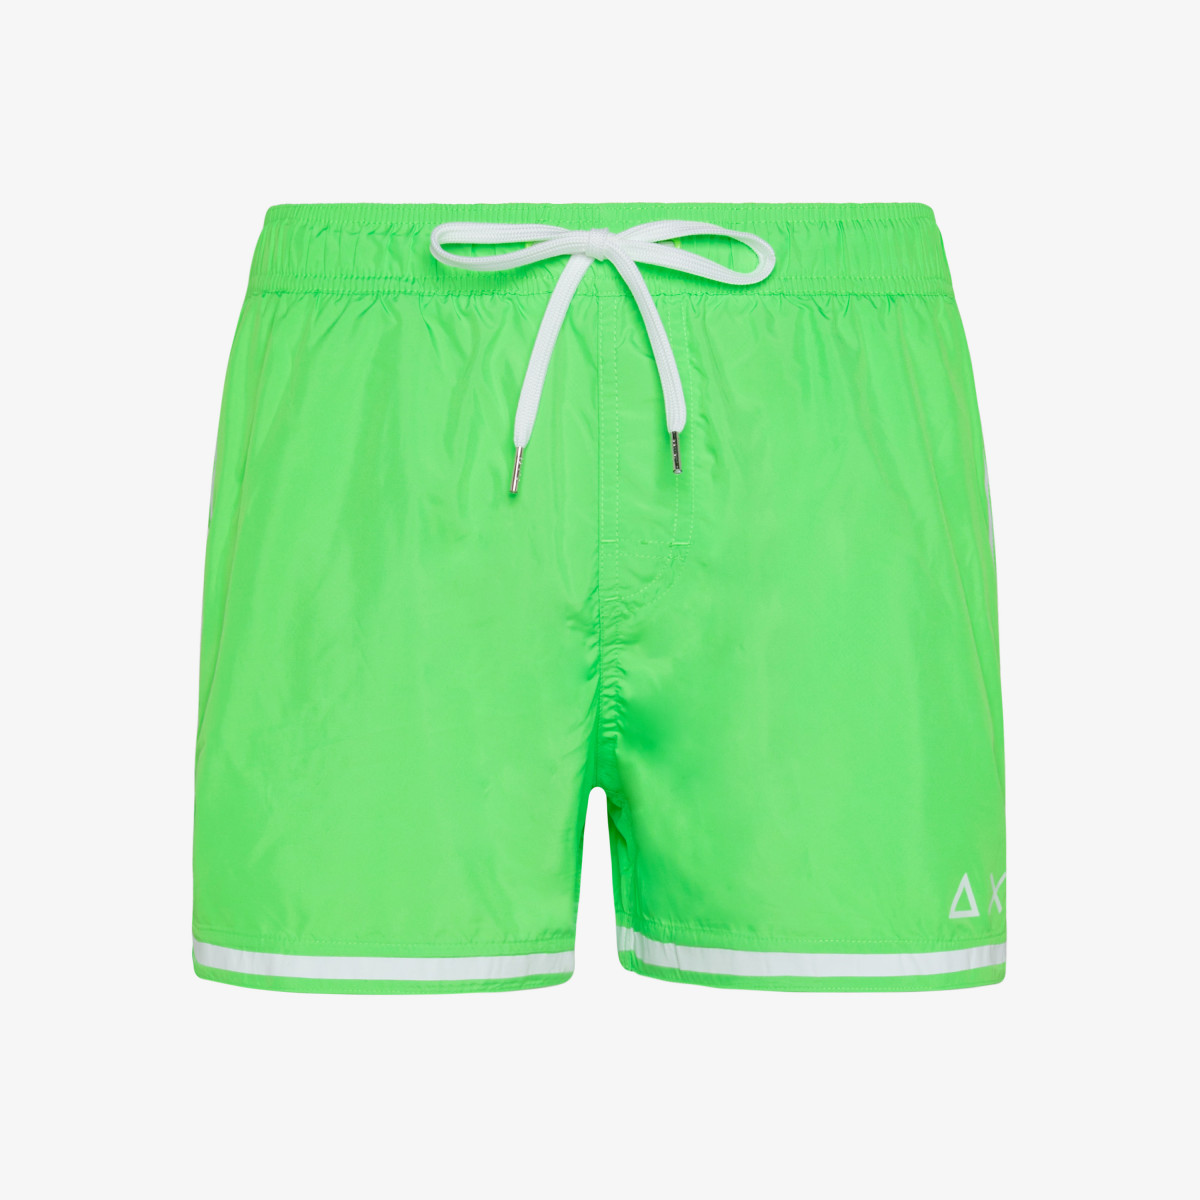 SWIM PANT SIDE BAND WHITE GREEN FLUO